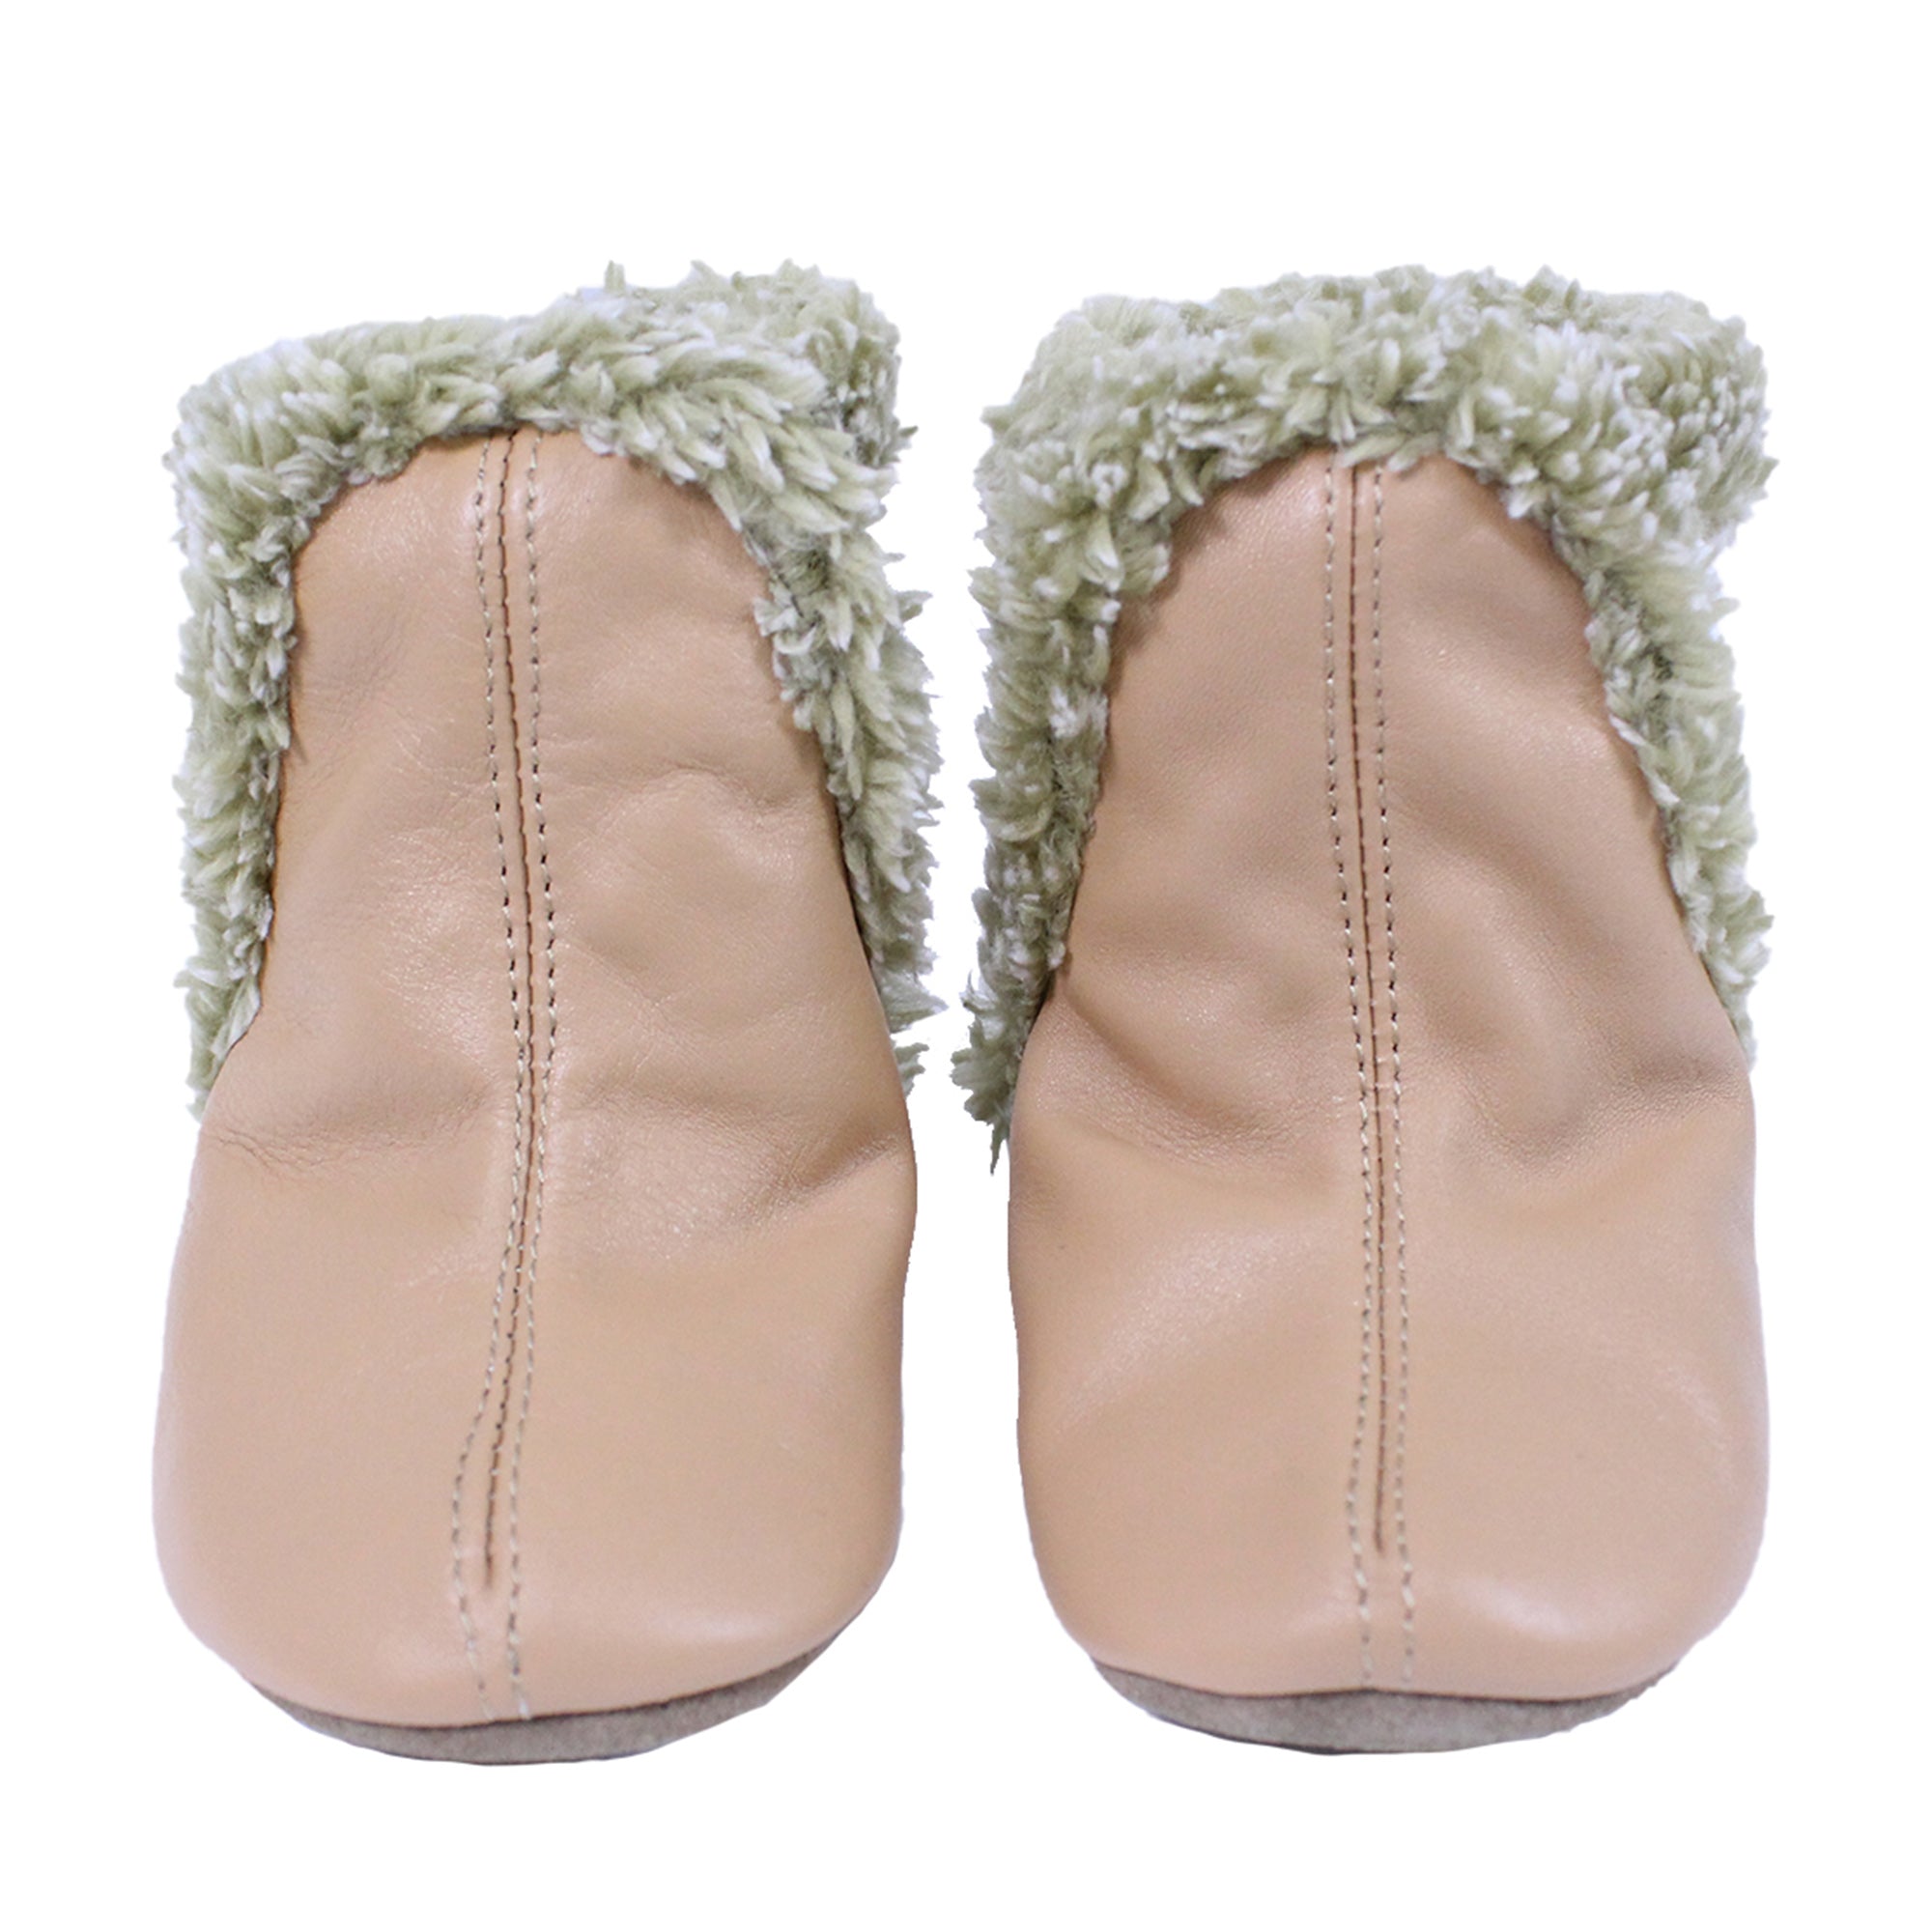 Cozies: Classic Bootie Taupe - Ages 0-18mth